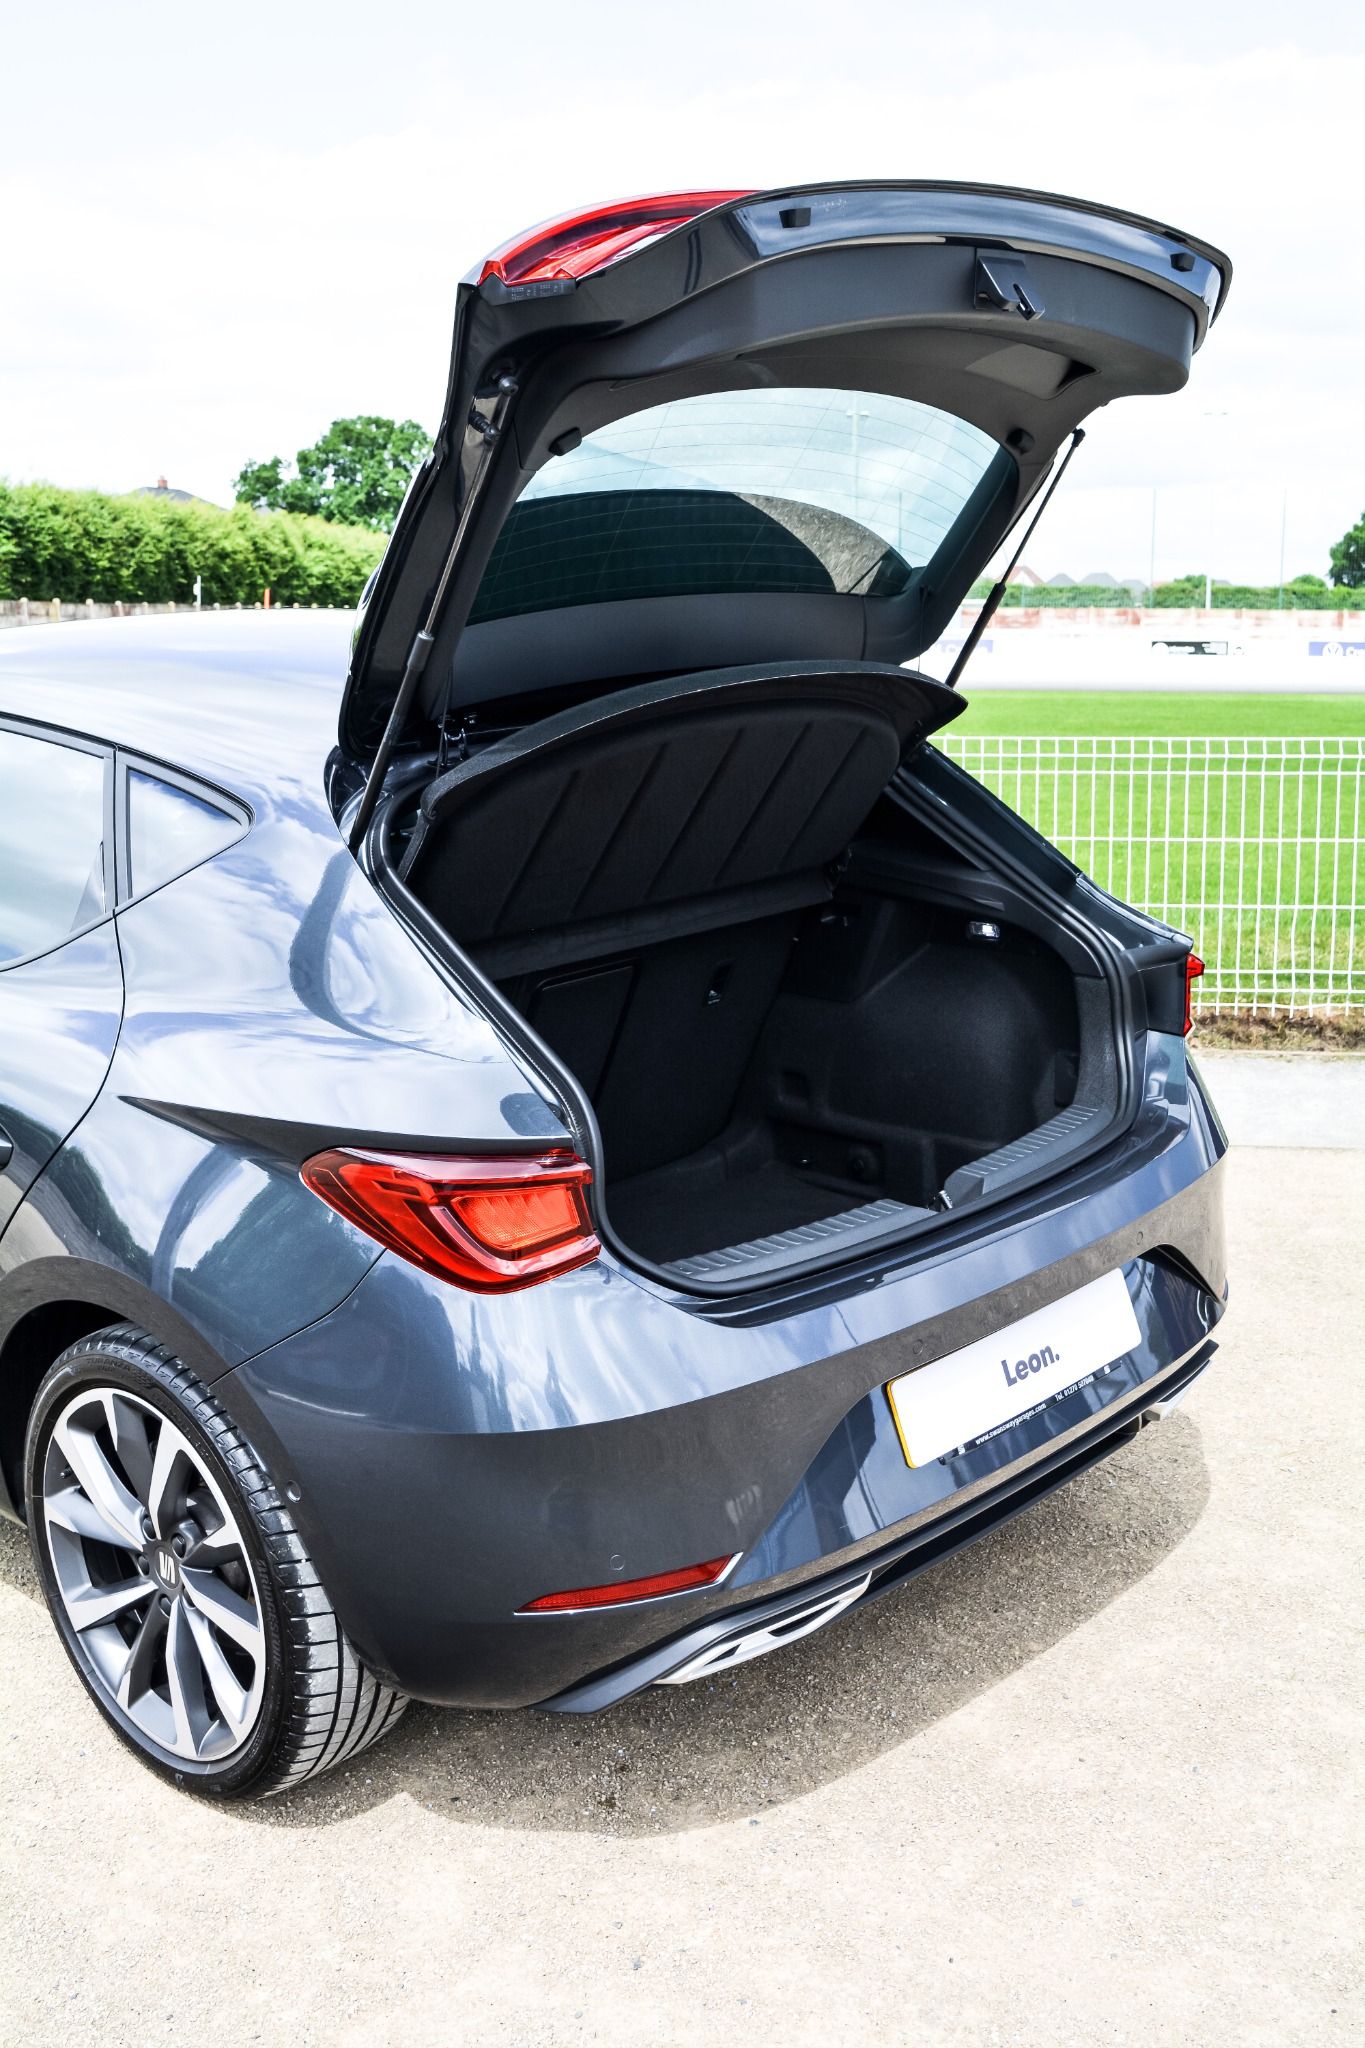 Rear view of boot opened on a SEAT Leon